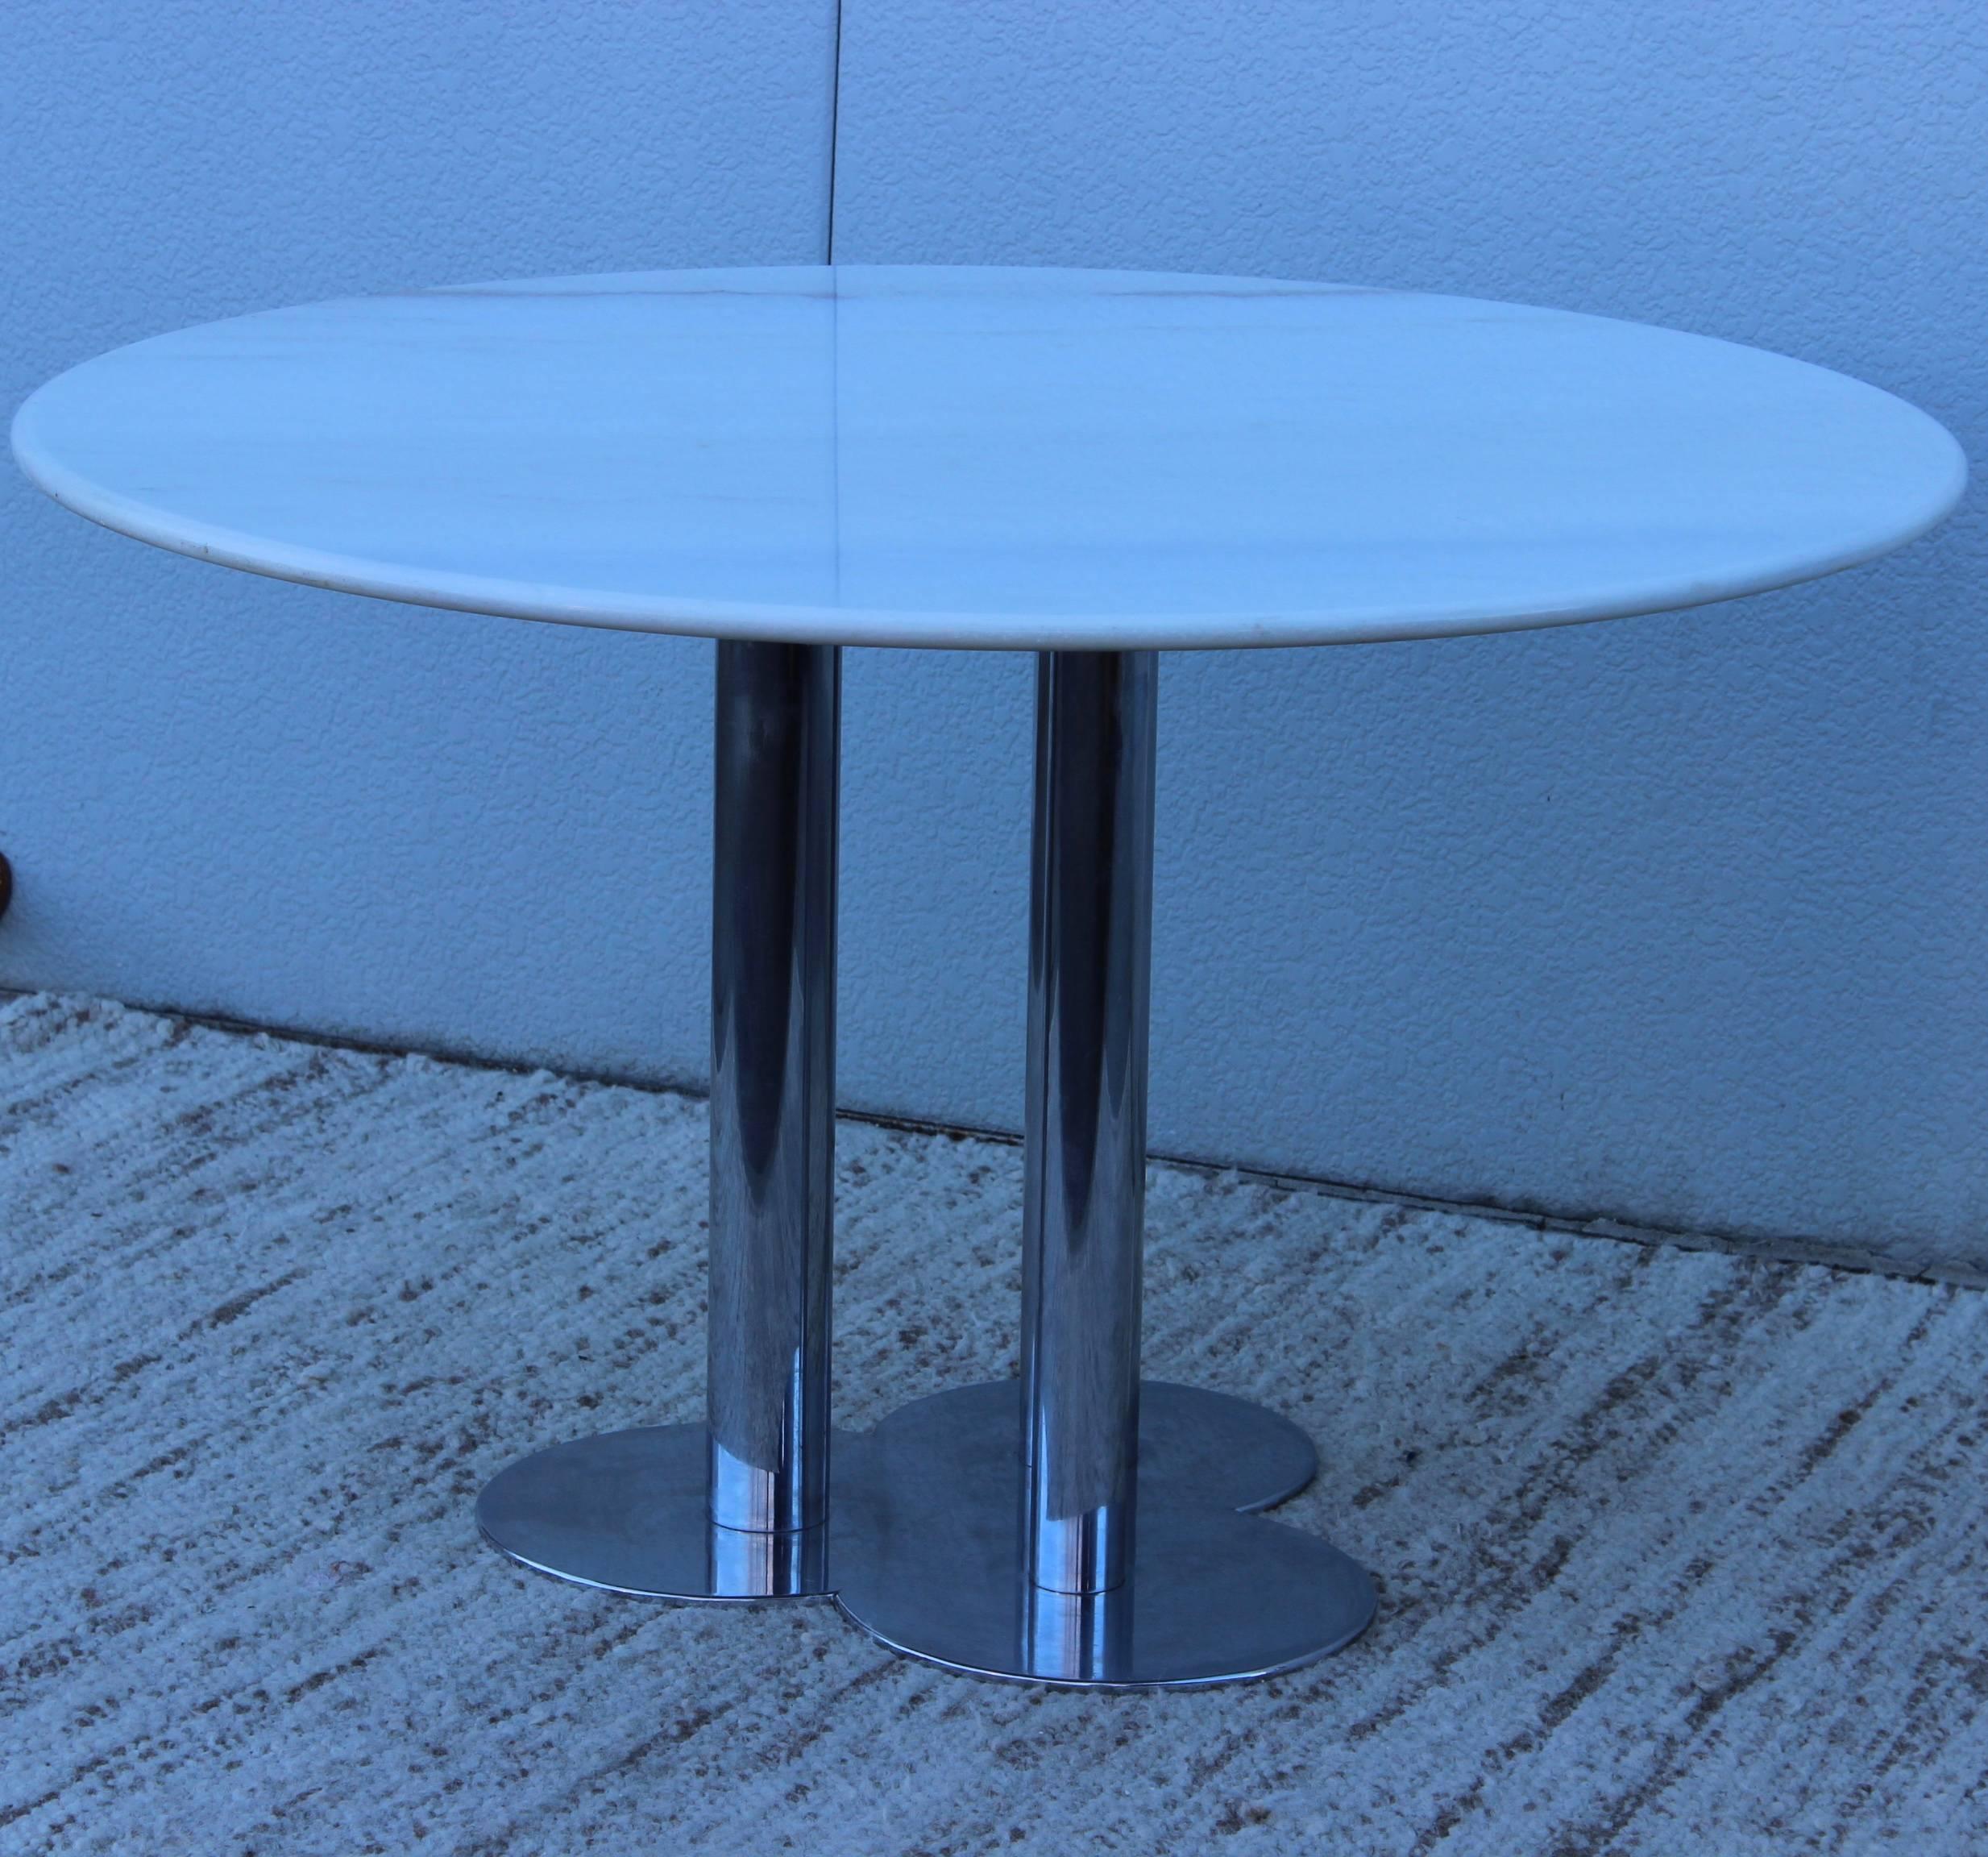 1960s Sergio Asti design for Poltronova dining table, with original granite top and chrome and steel base.